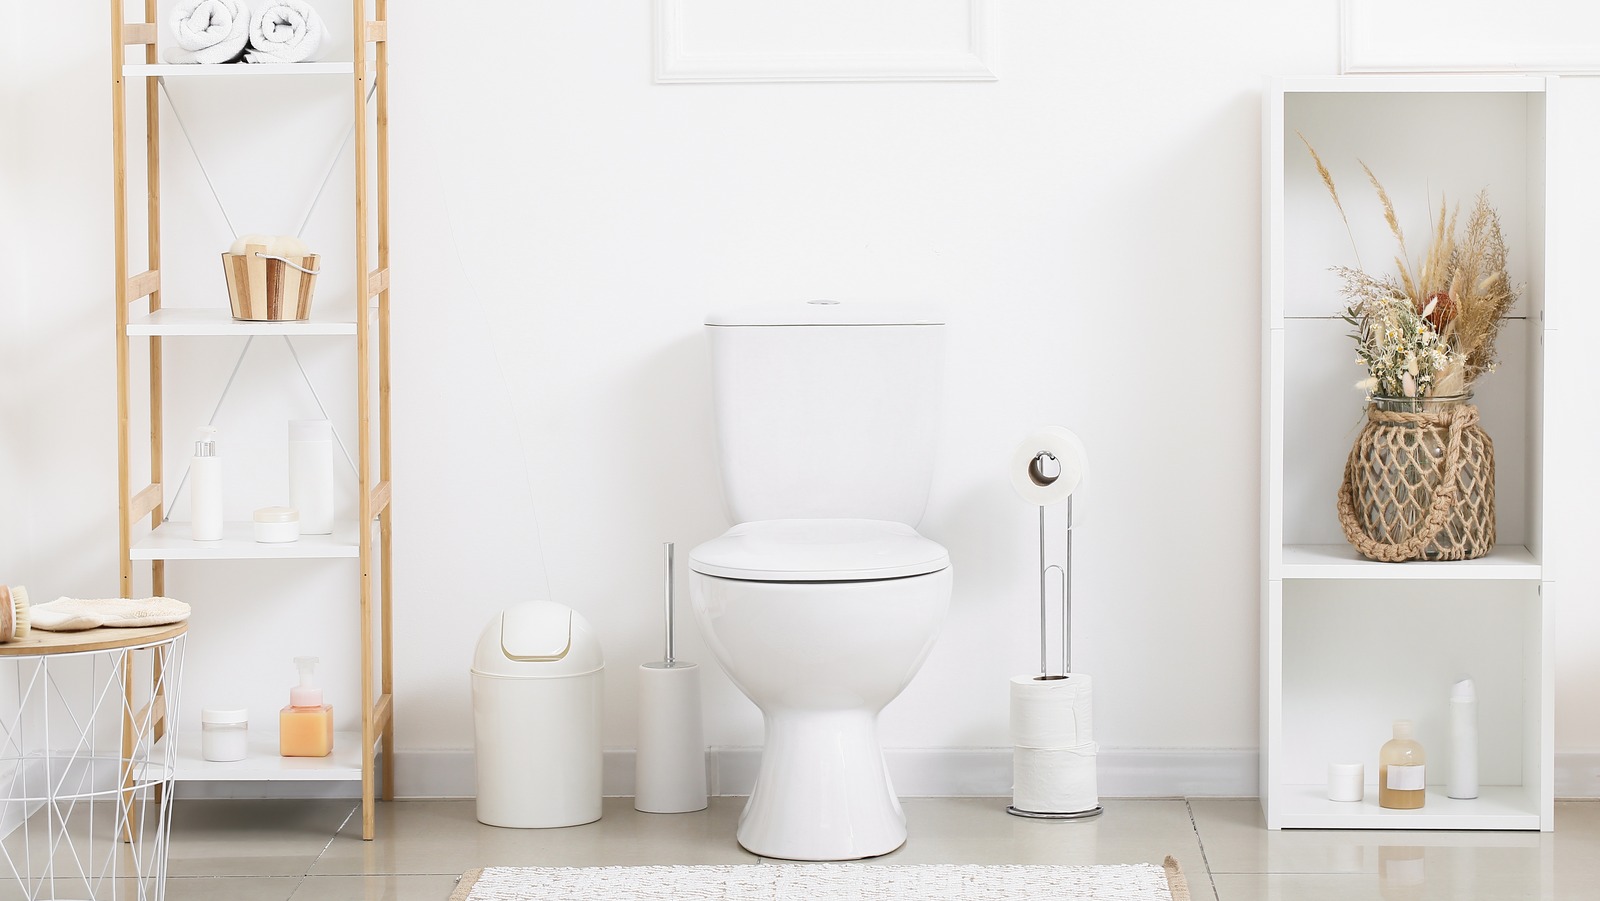 https://www.housedigest.com/img/gallery/how-to-make-the-most-of-the-space-above-your-toilet/l-intro-1689346542.jpg